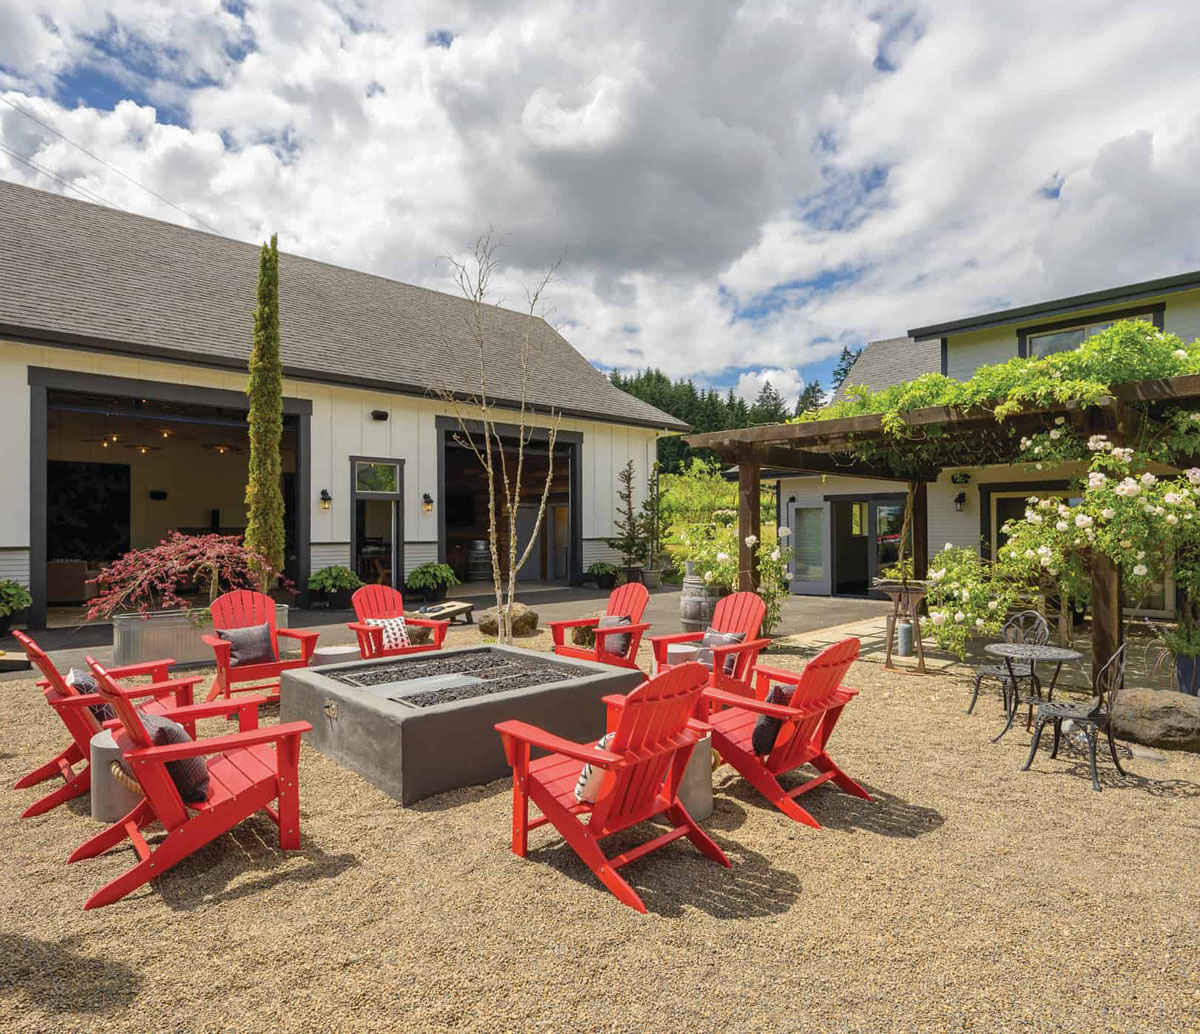 Setting Inn in Willamette Valley, one of the most romantic getaways in the Pacific Northwest